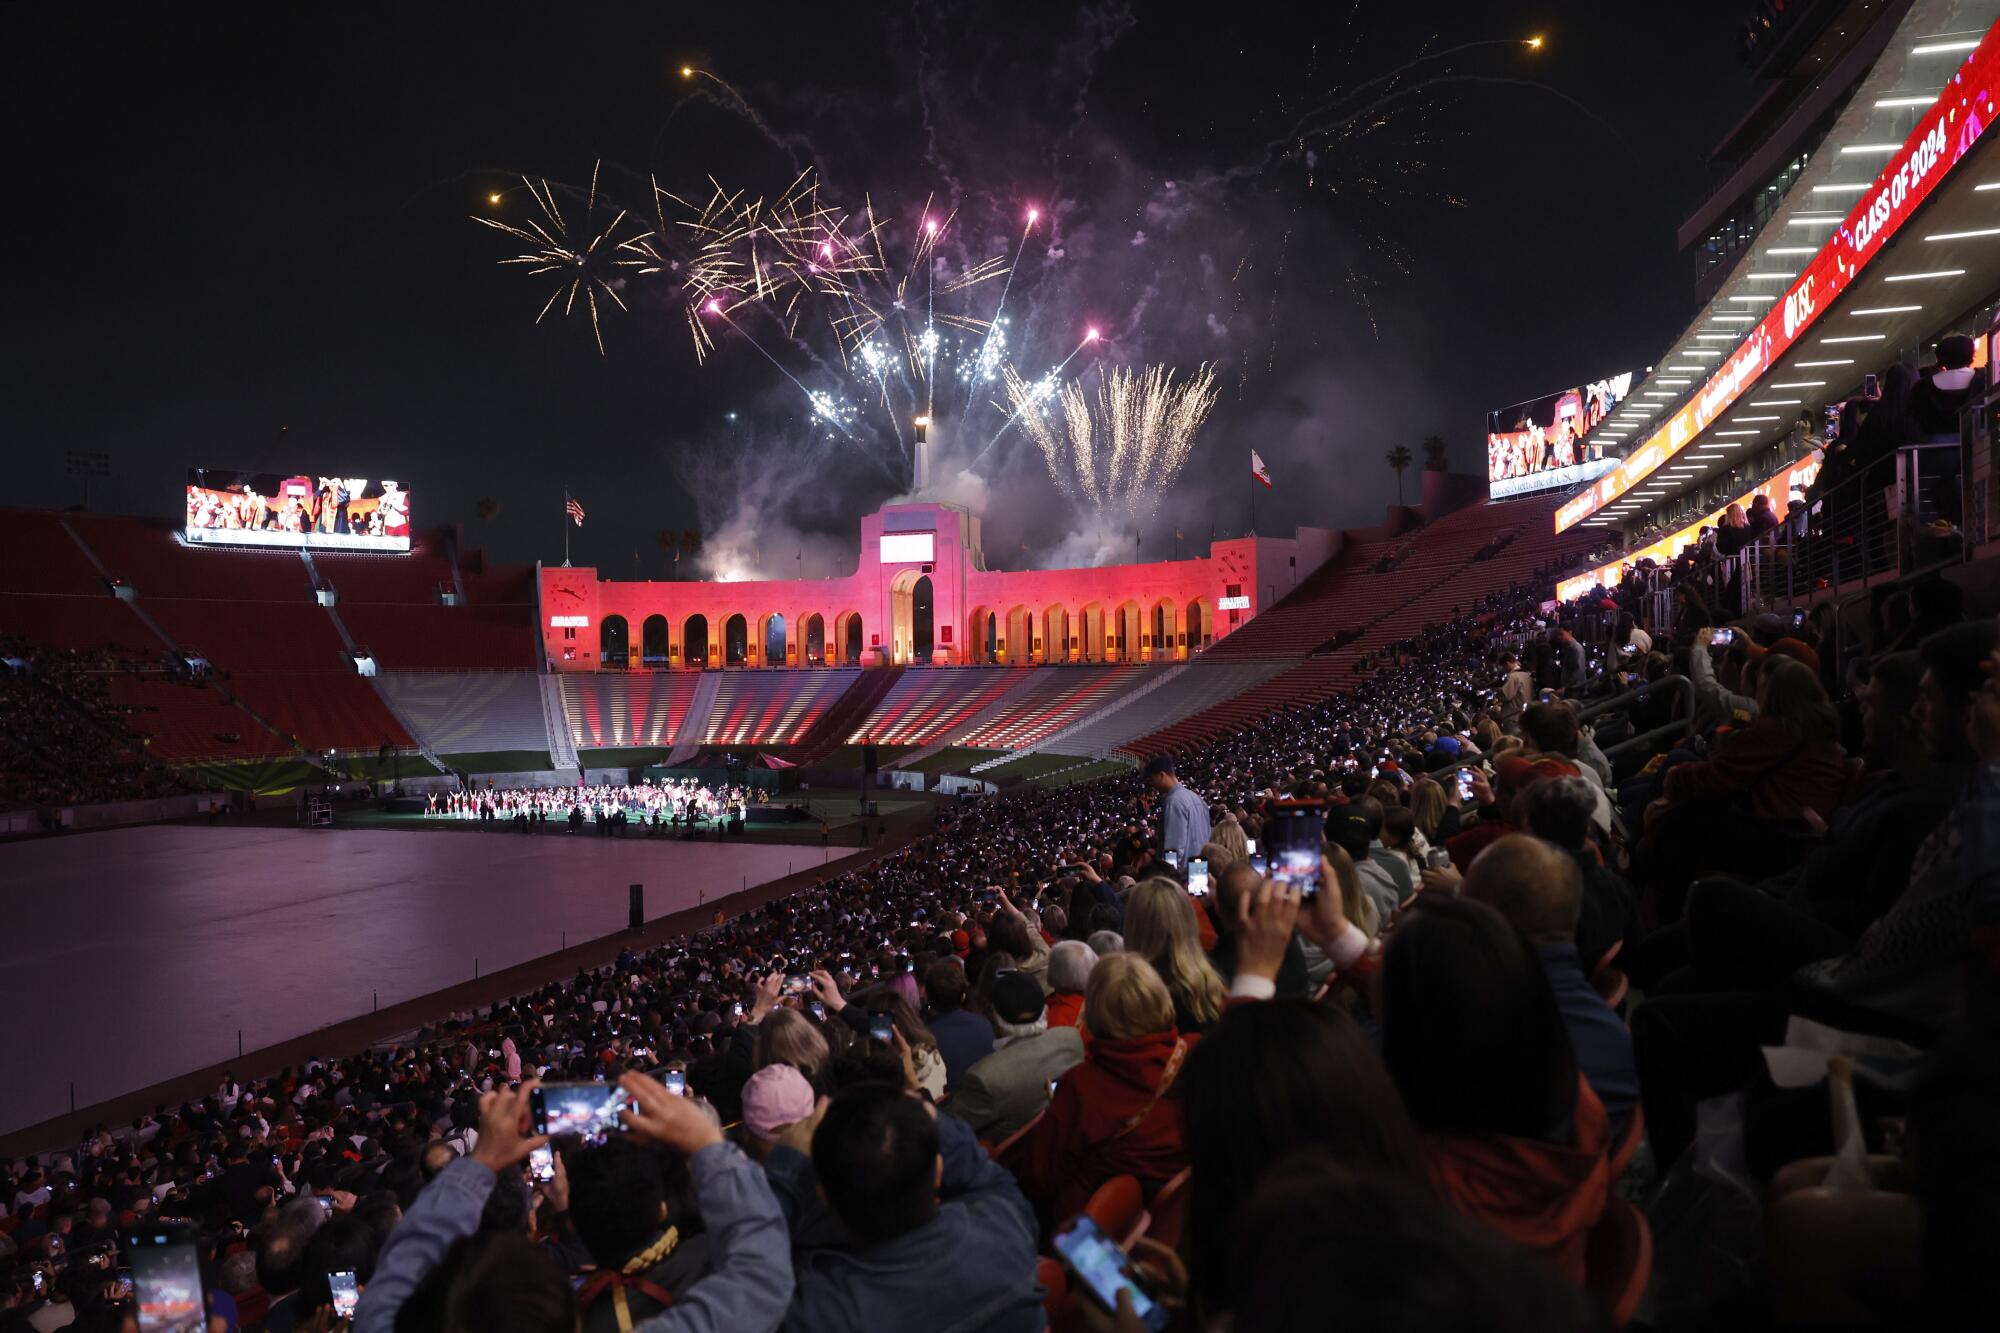 Spectators cheer and take photos as fireworks go off at "Trojan Family Graduate Celebration" at the Colosseum